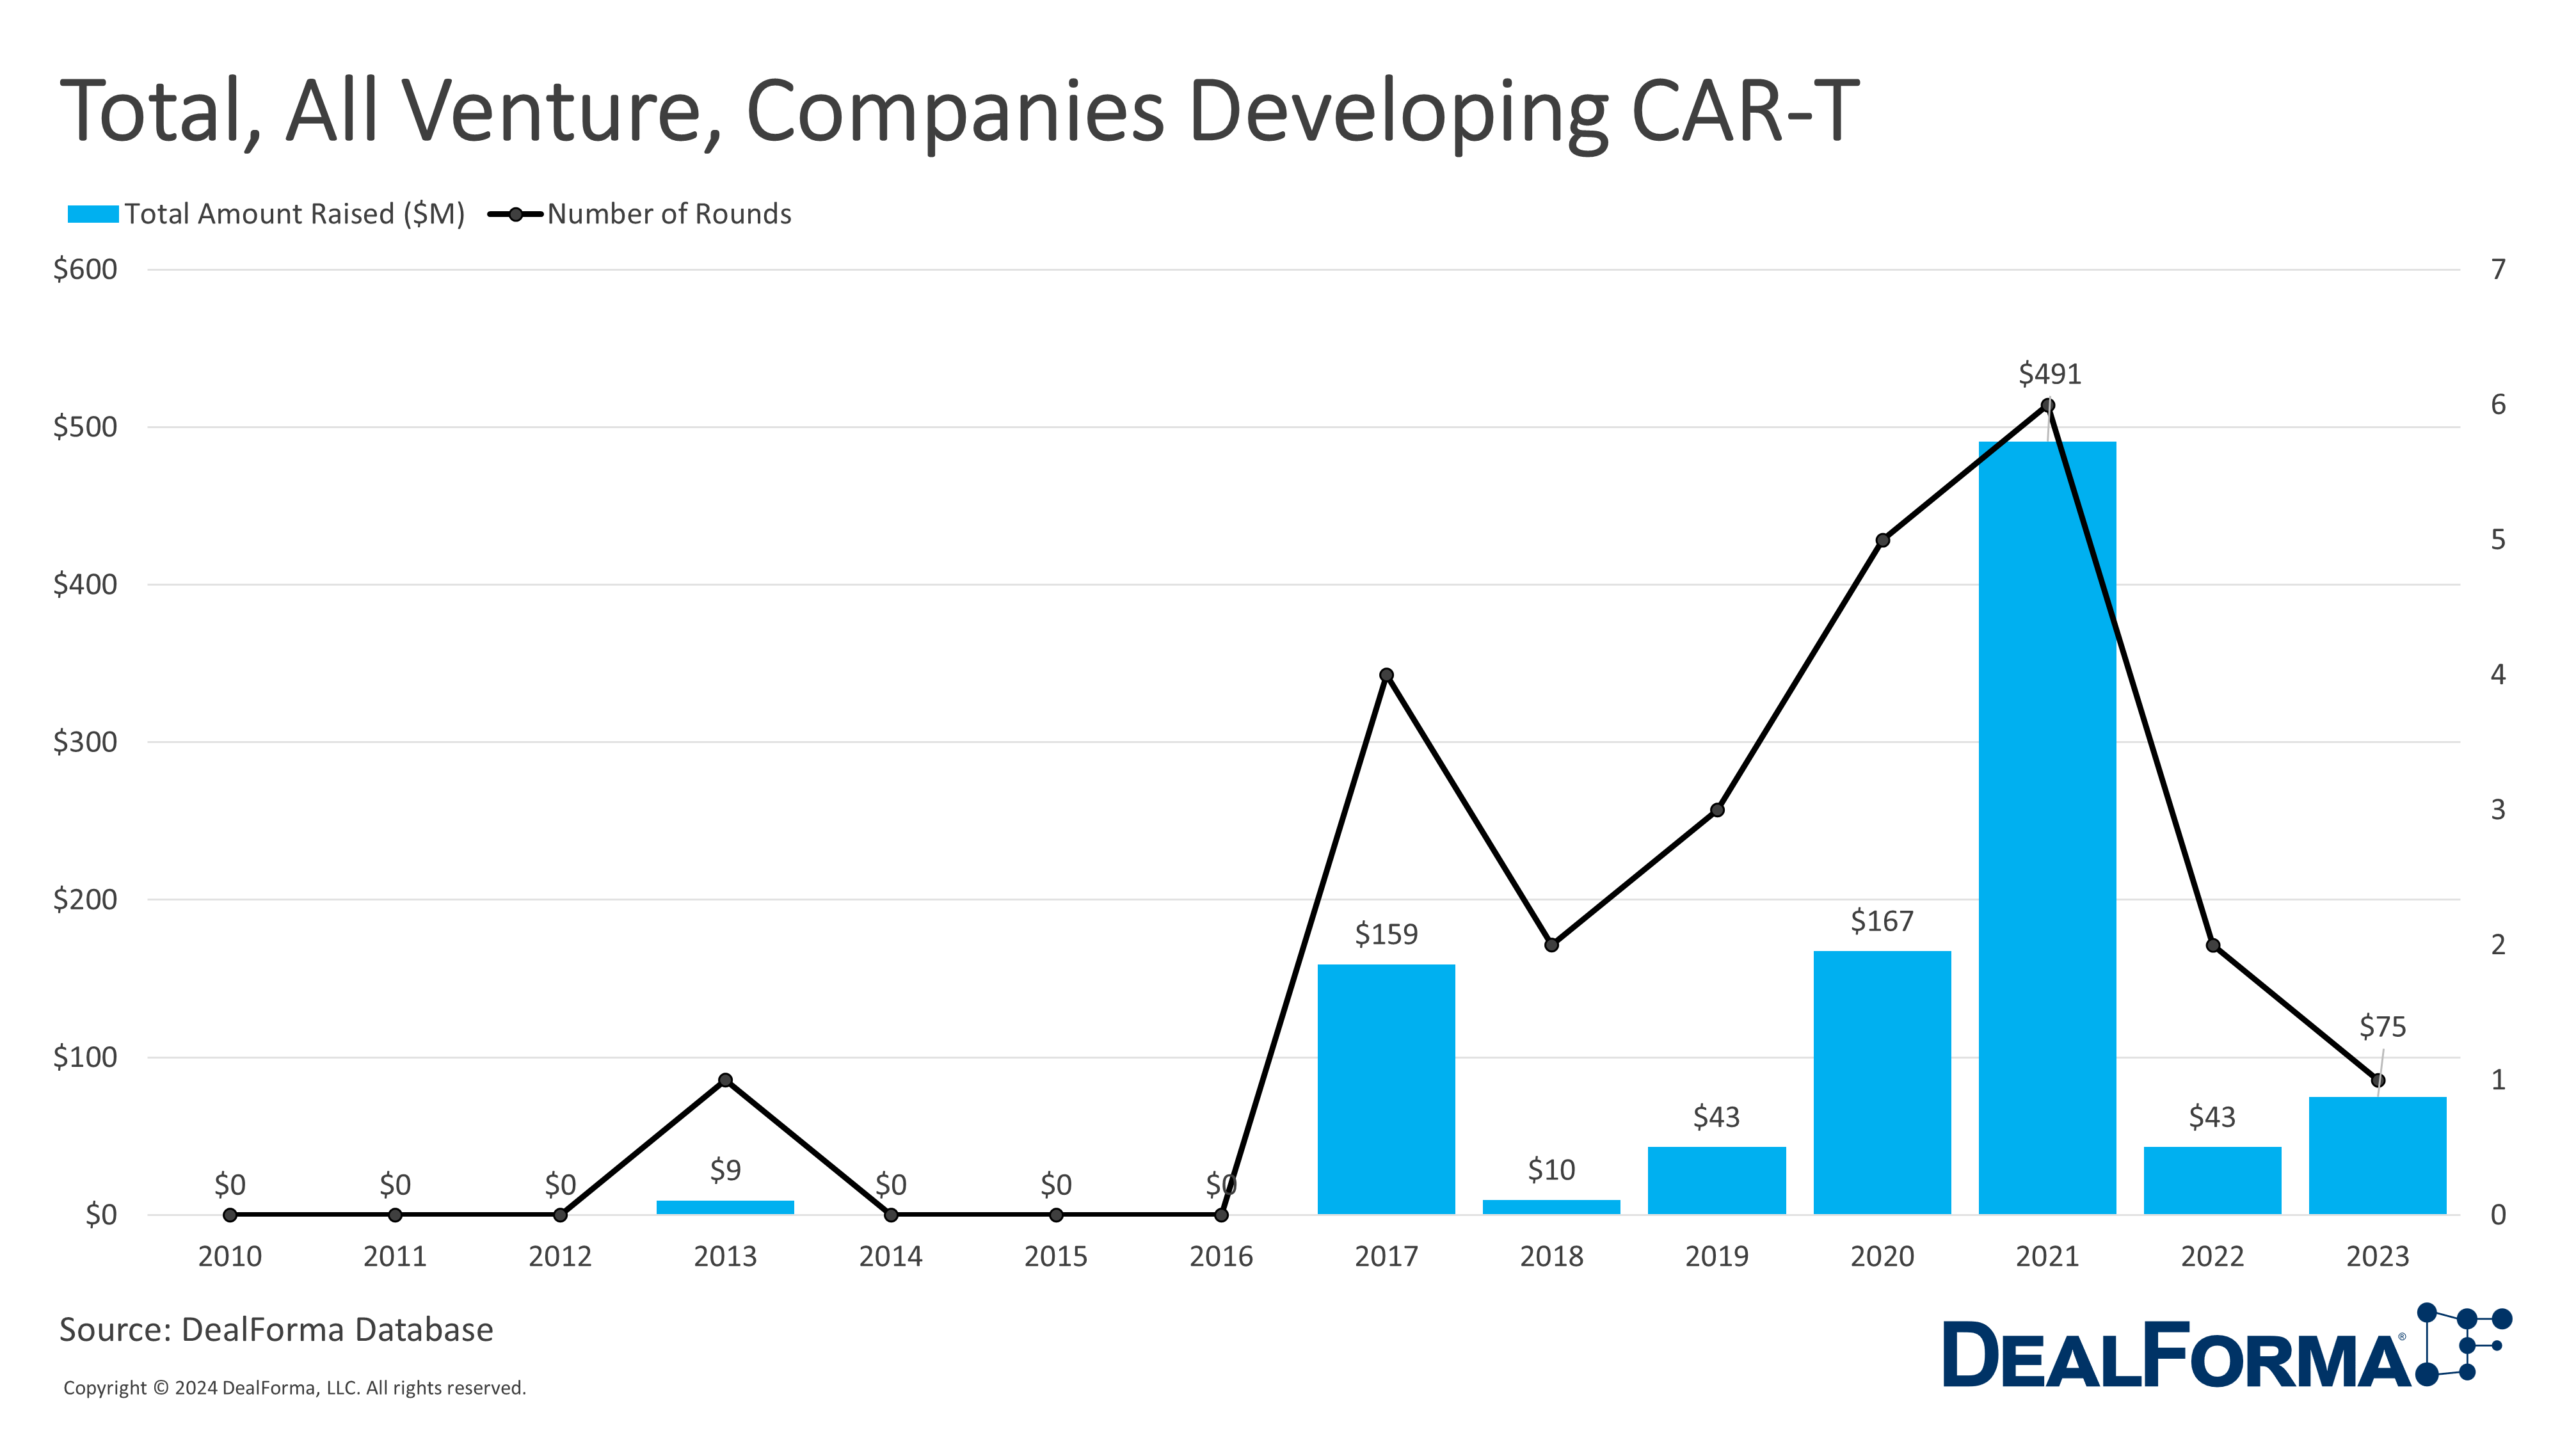 Total, All Venture, Companies Developing CAR-T